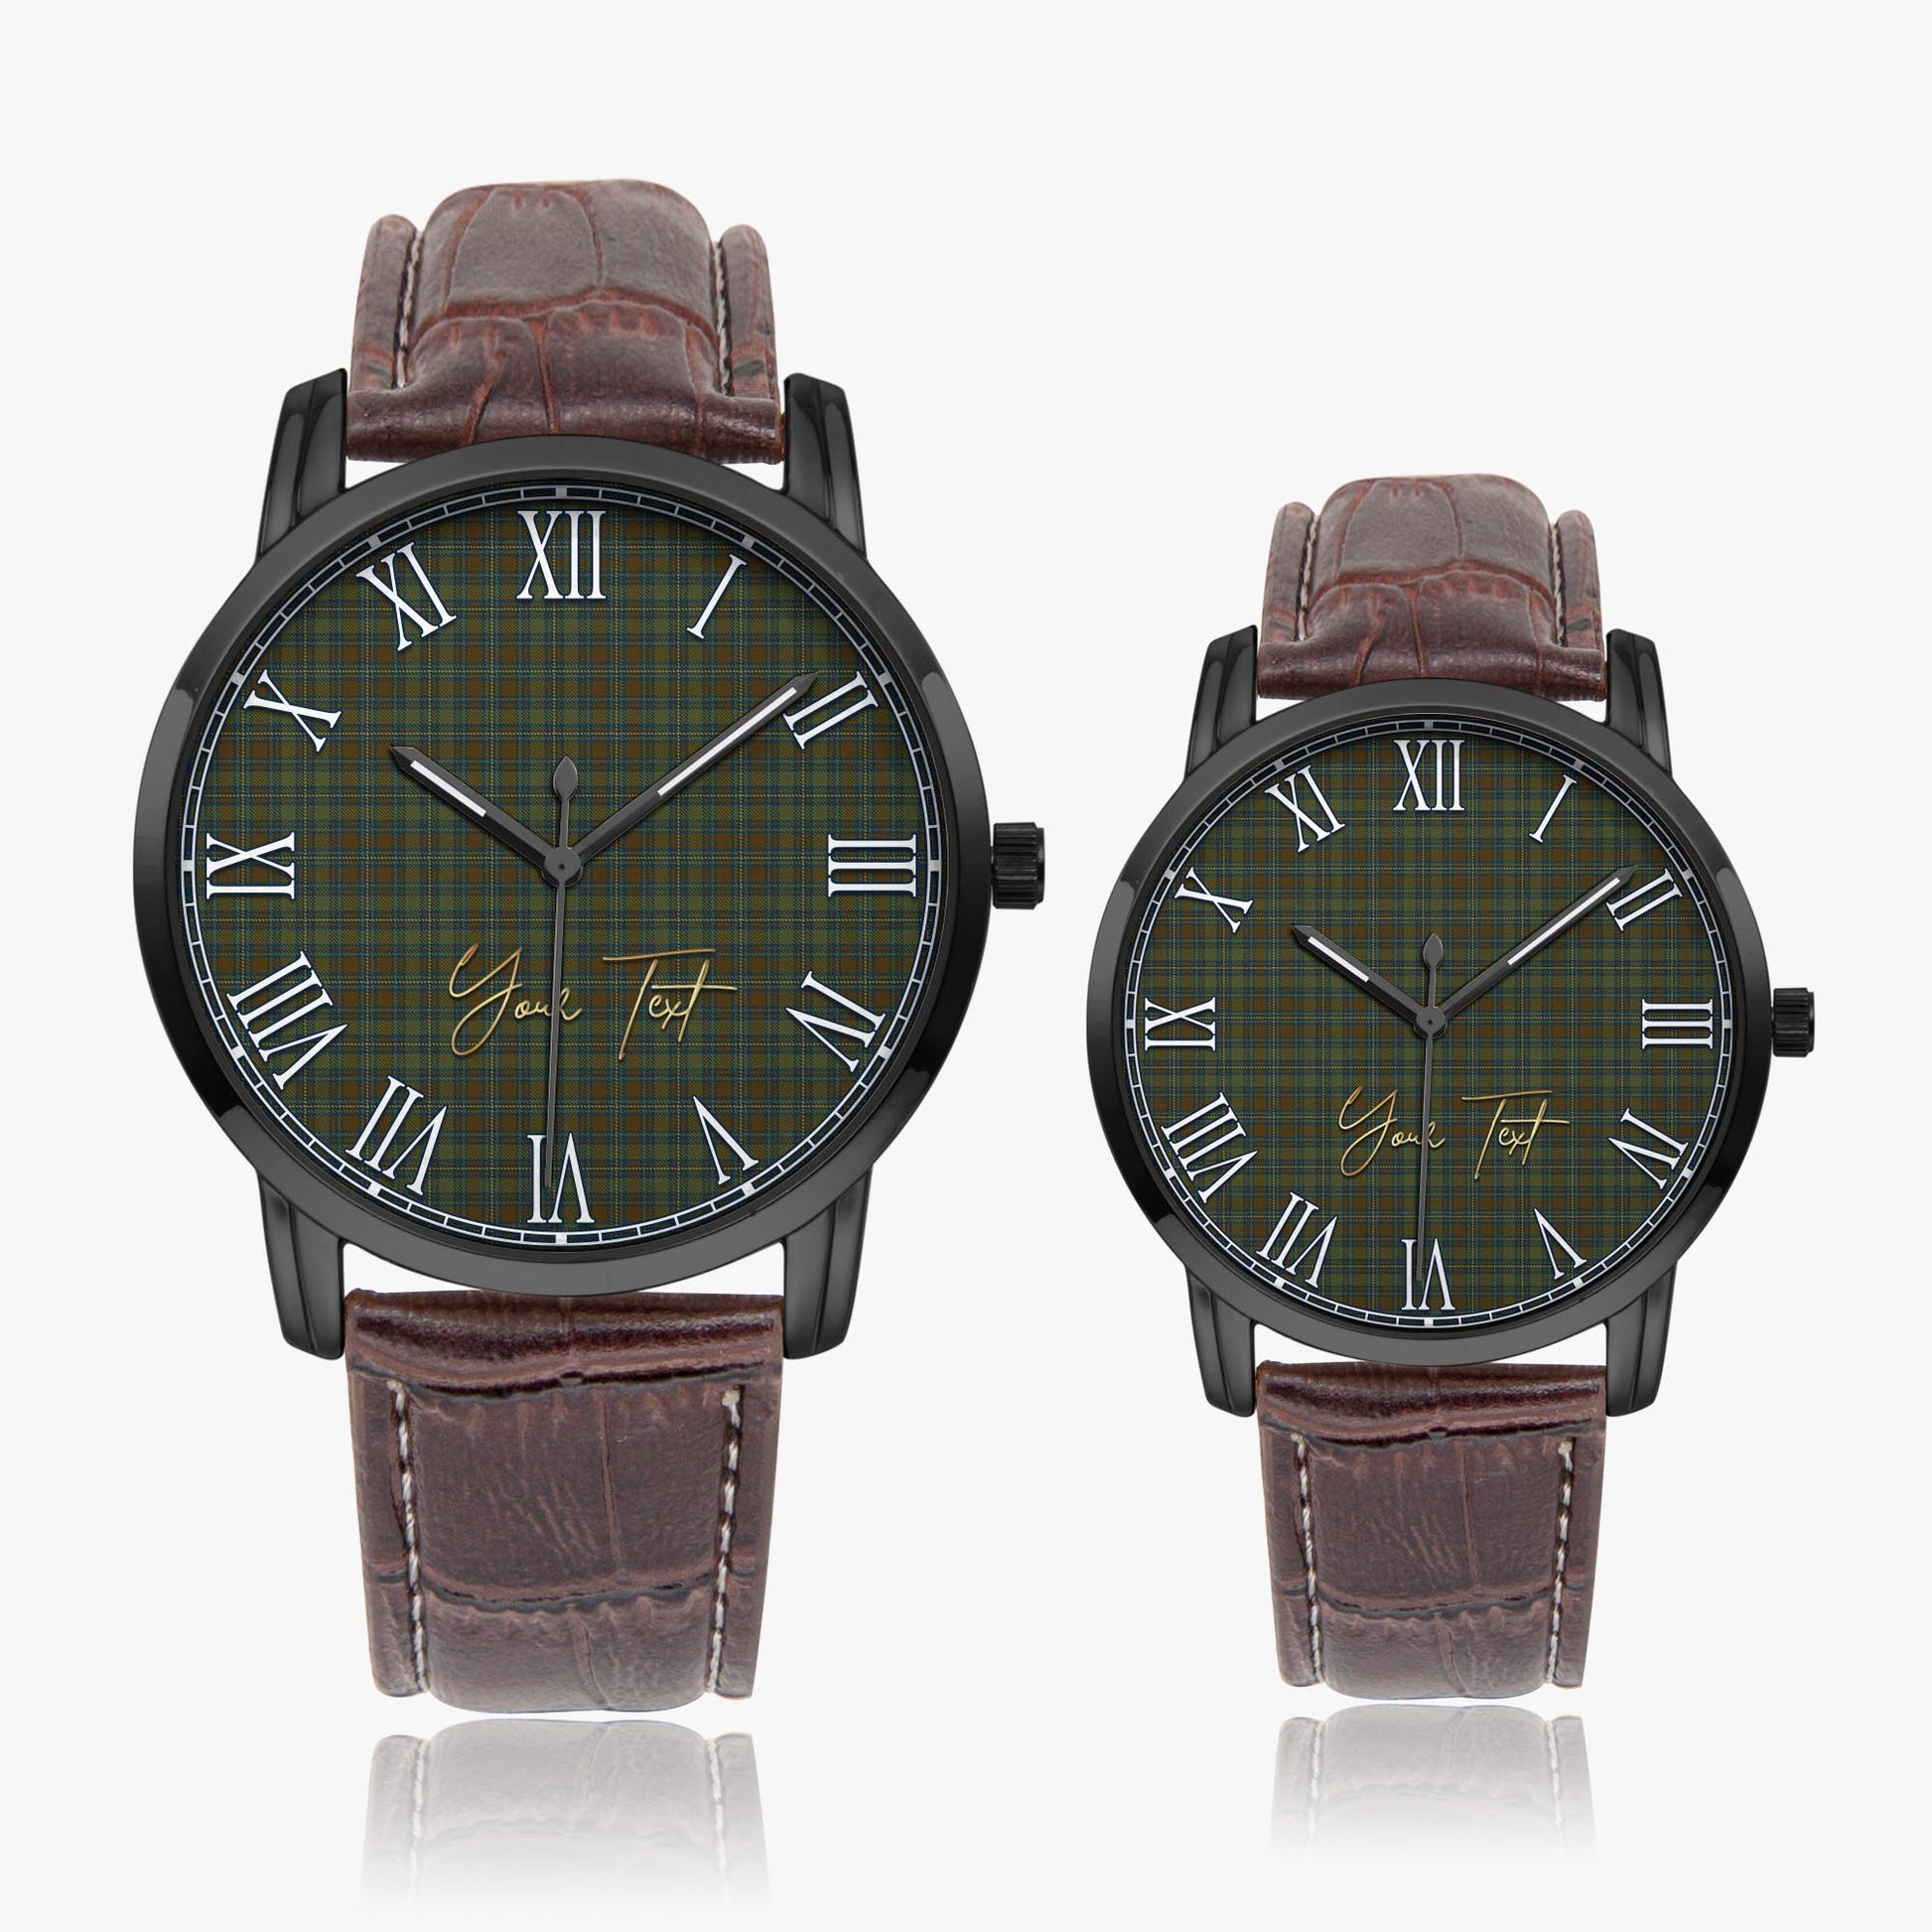 Kerry County Ireland Tartan Personalized Your Text Leather Trap Quartz Watch Wide Type Black Case With Brown Leather Strap - Tartanvibesclothing